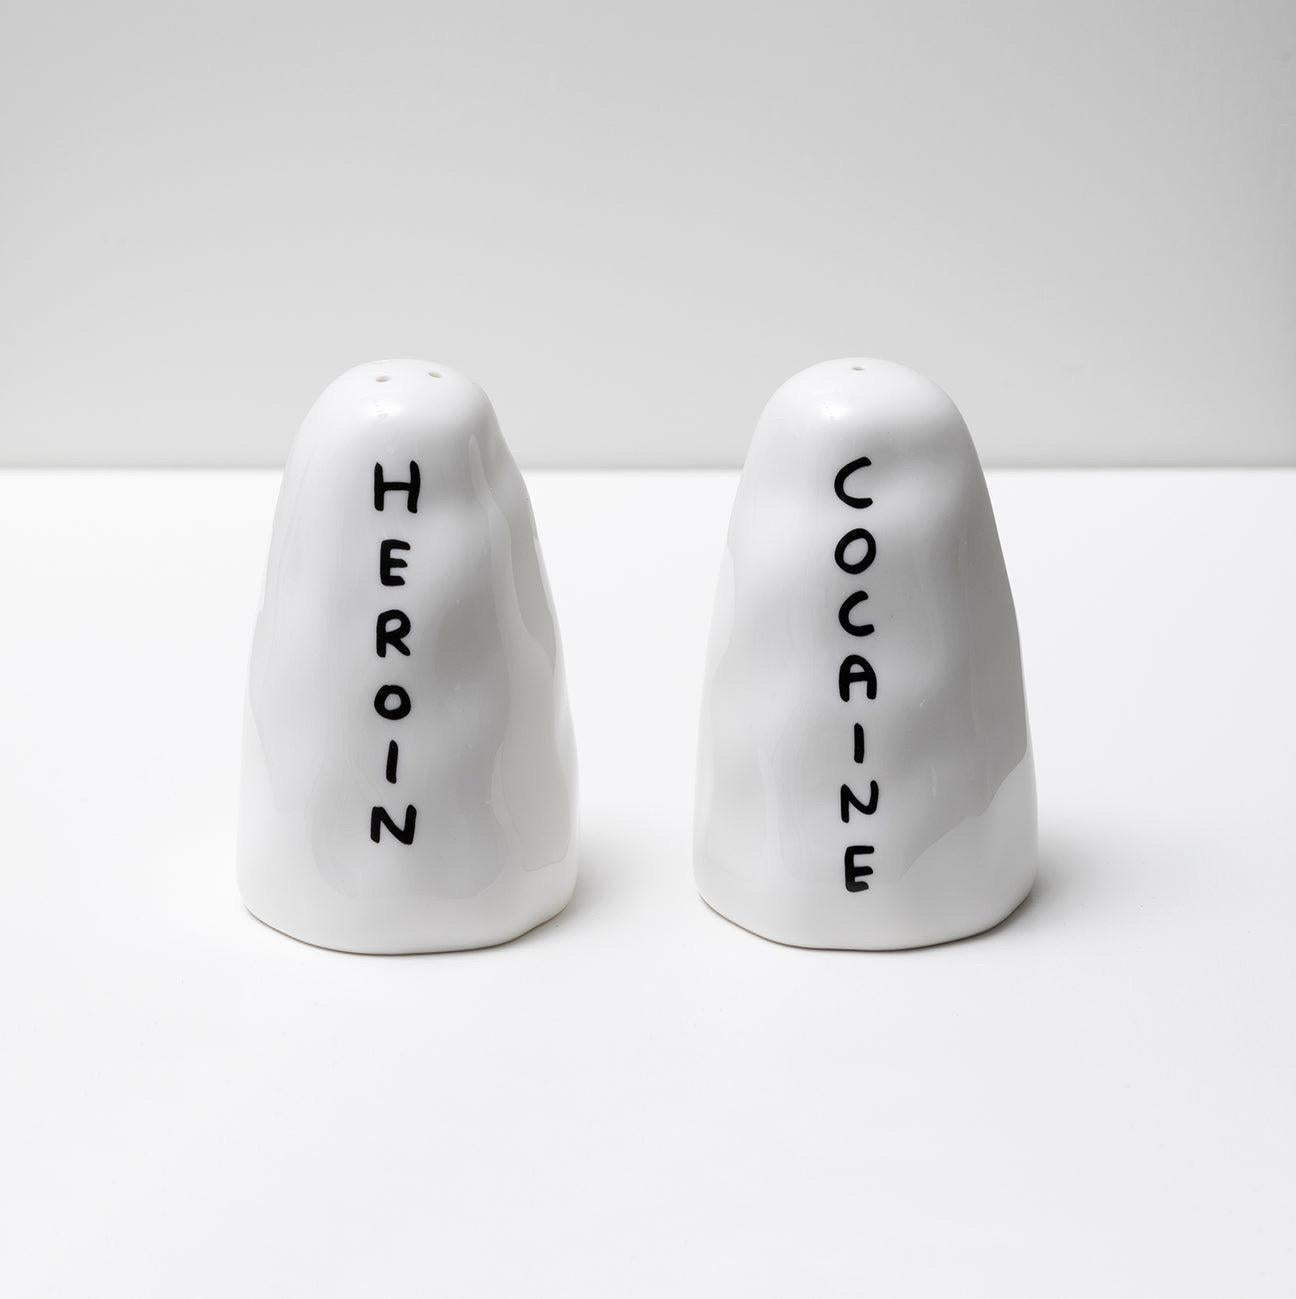 David Shrigley Abstract Sculpture - Heroin and Cocaine shakers